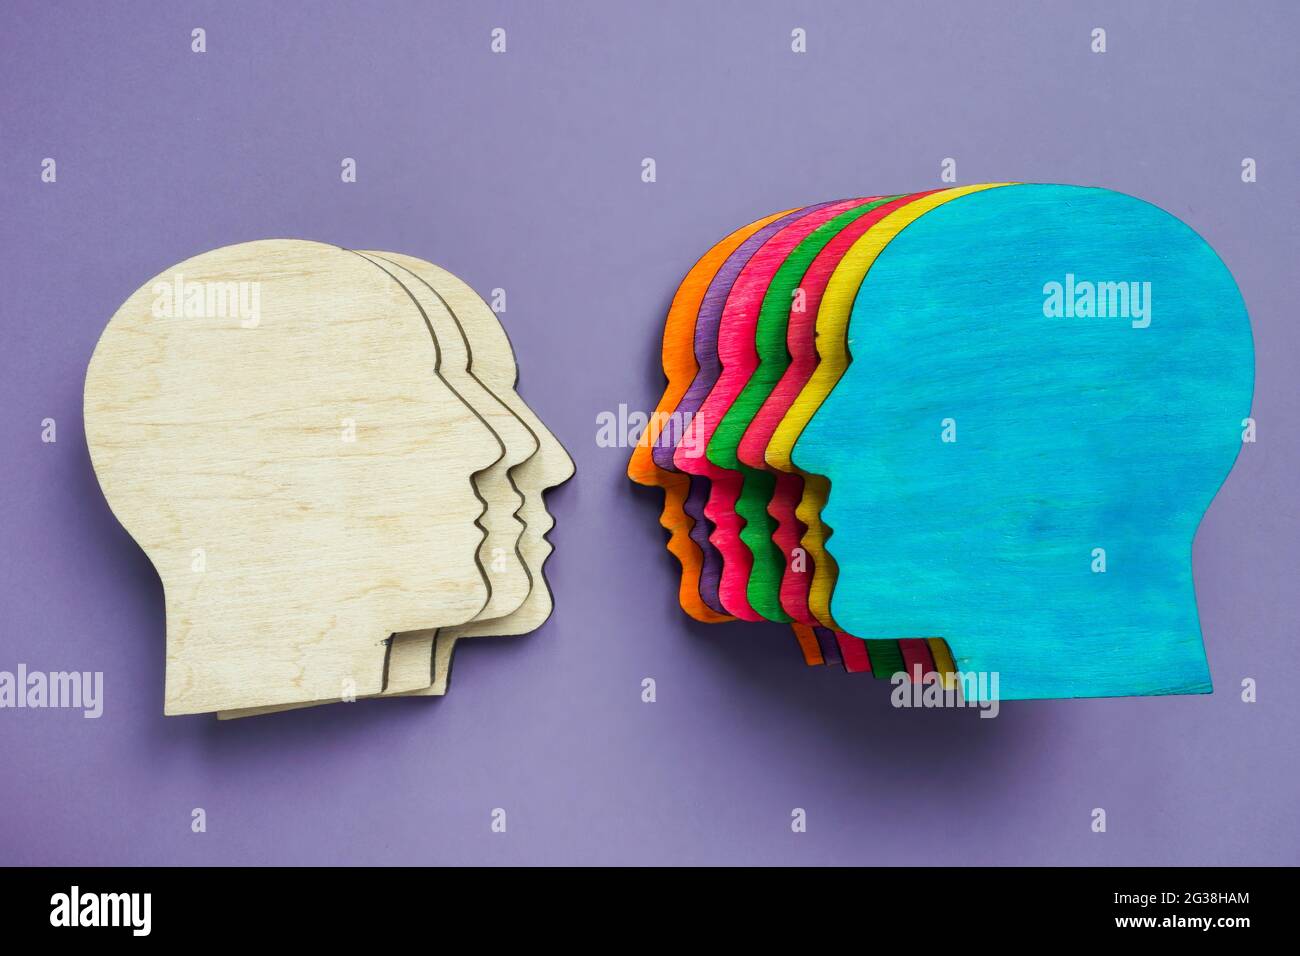 Equality and diversity concept. Multi-colored figurines of heads. Stock Photo